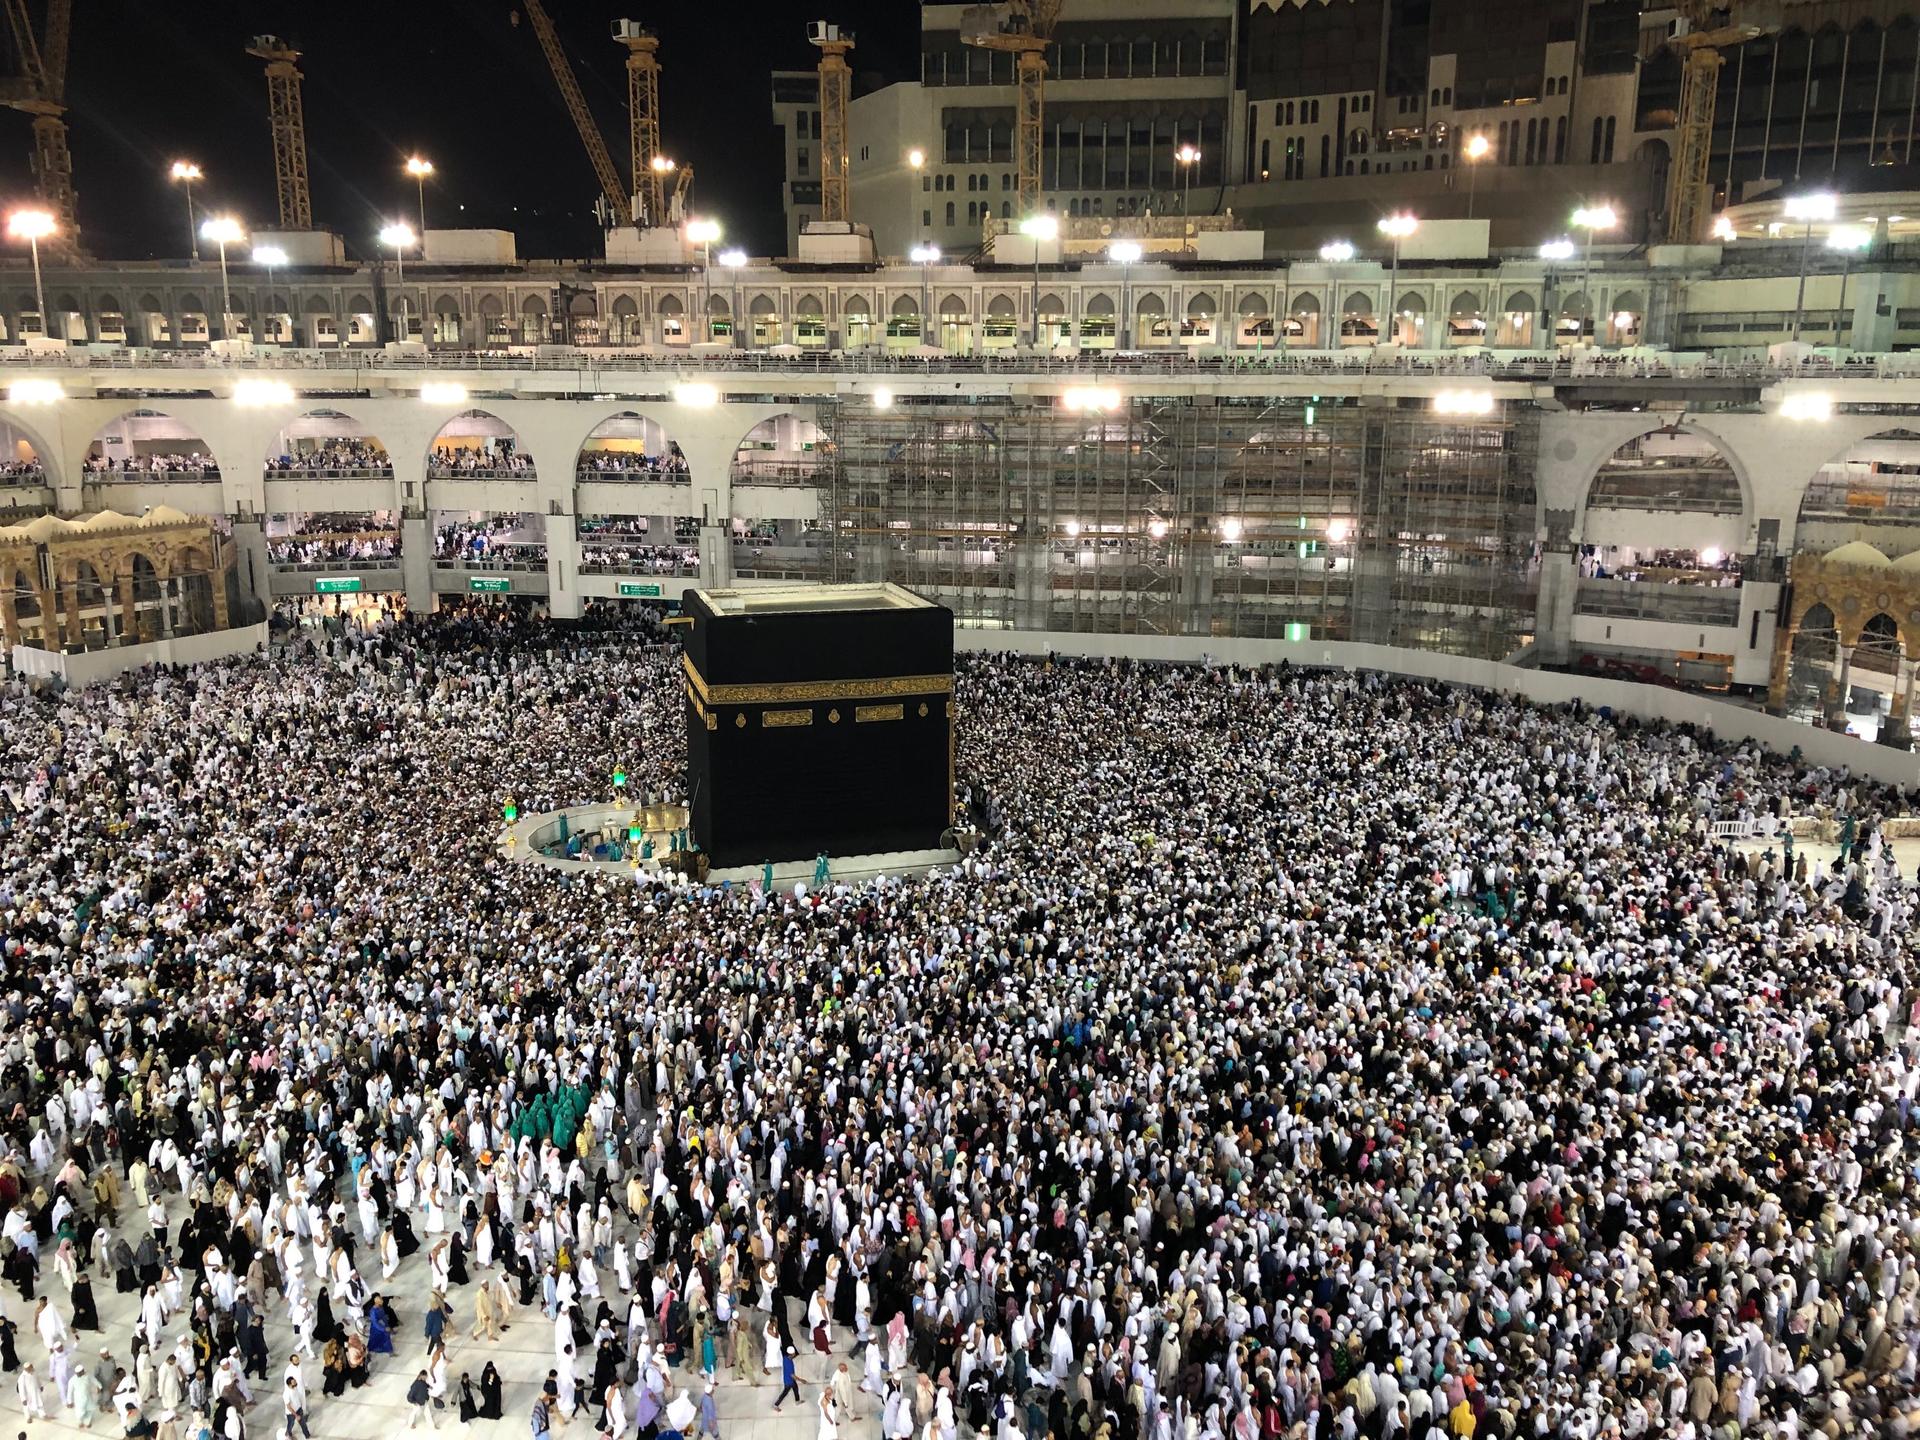 Every year, millions of Muslims from around the world descend upon Mecca, Saudi Arabia for the Hajj.